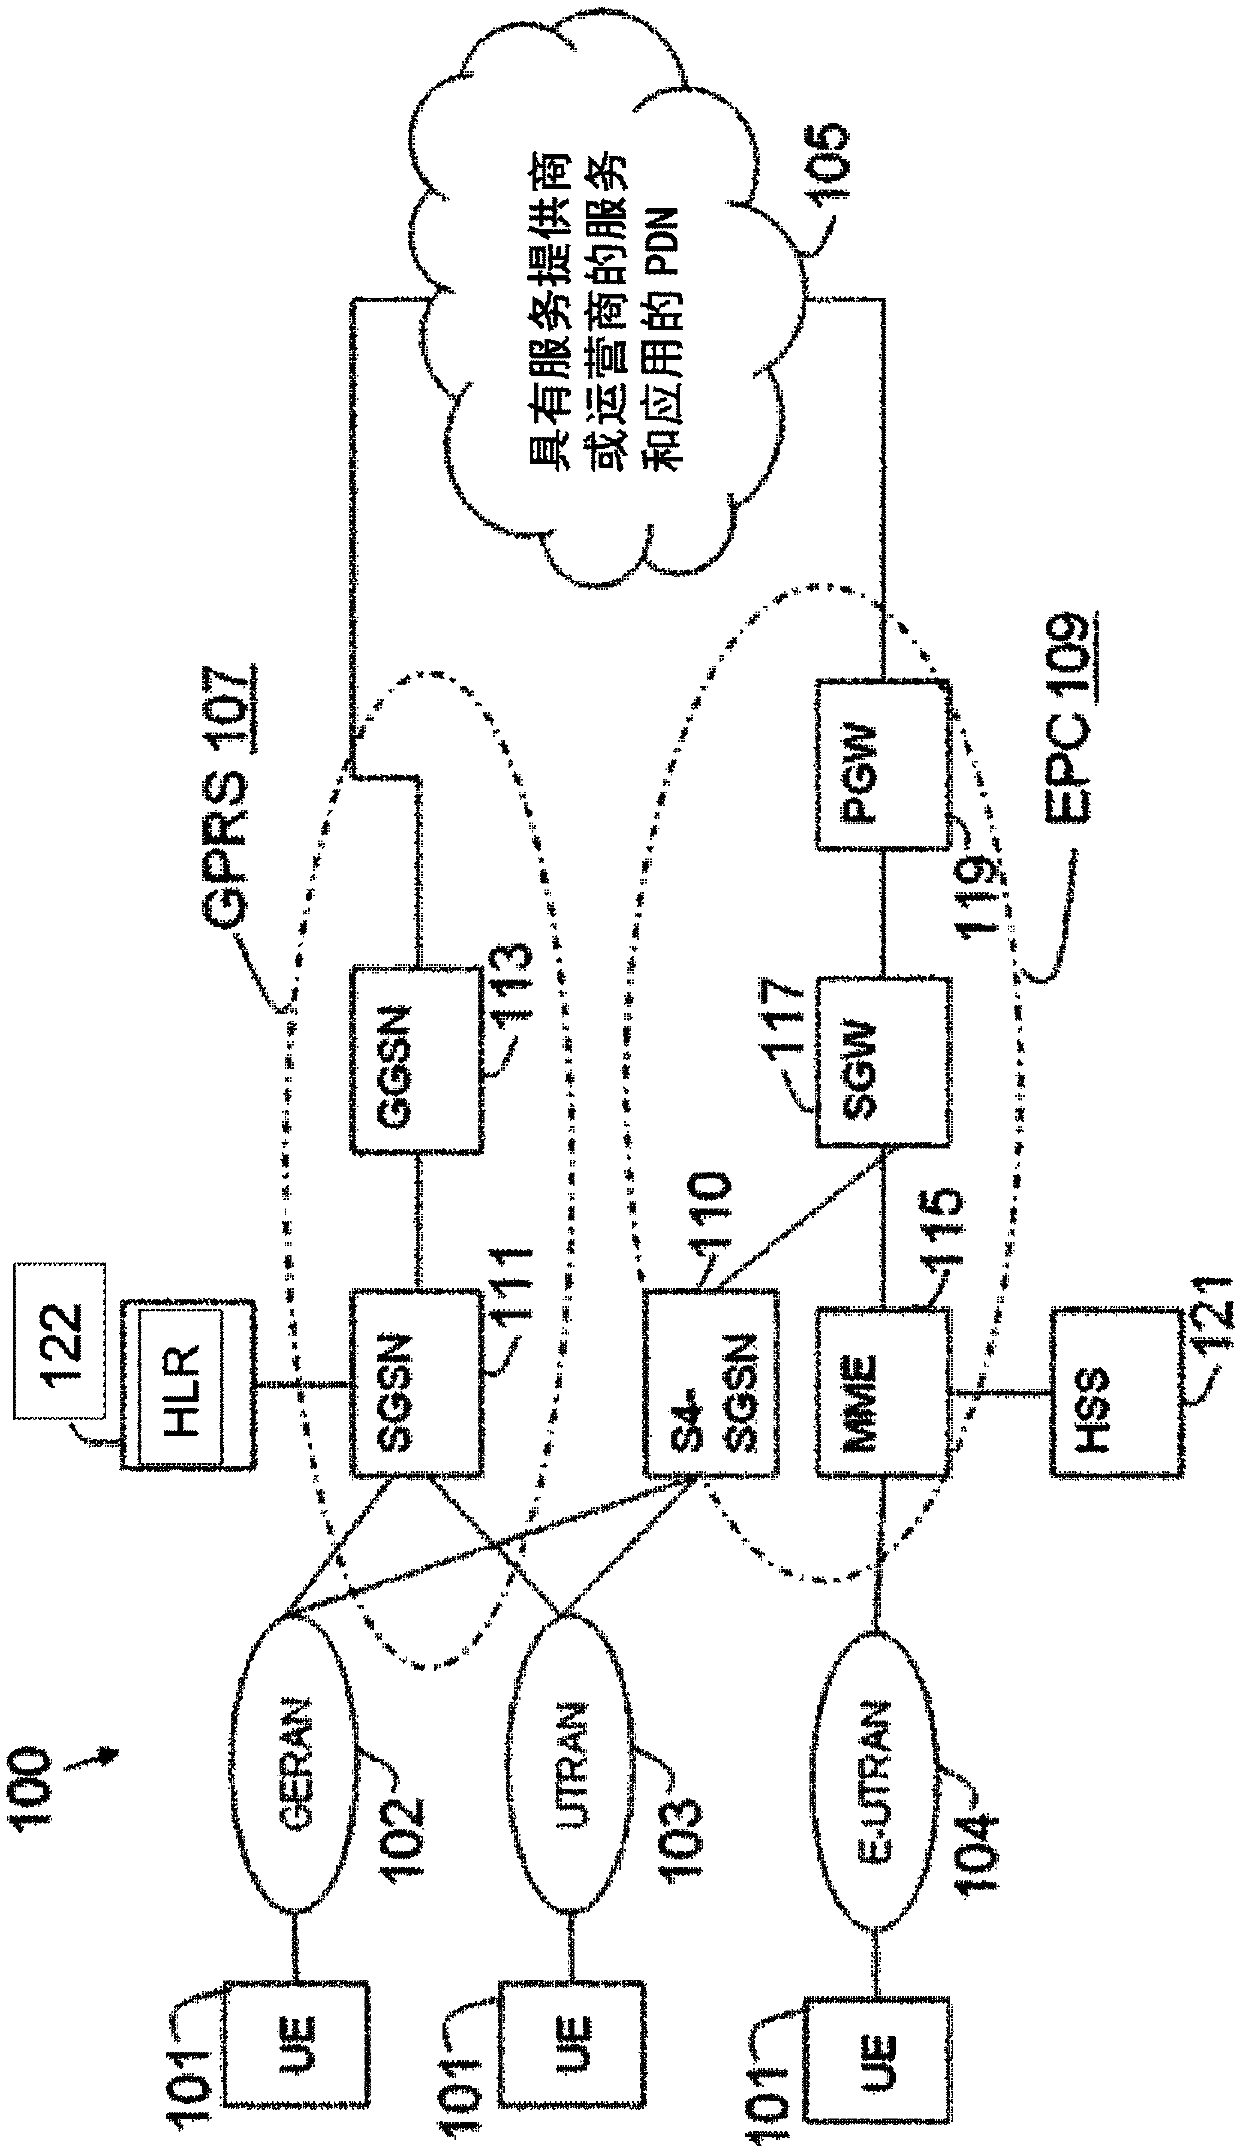 Node And Method For Prescheduling Ulink Resources In A Wireless Network According To A Ue's Application Requirements